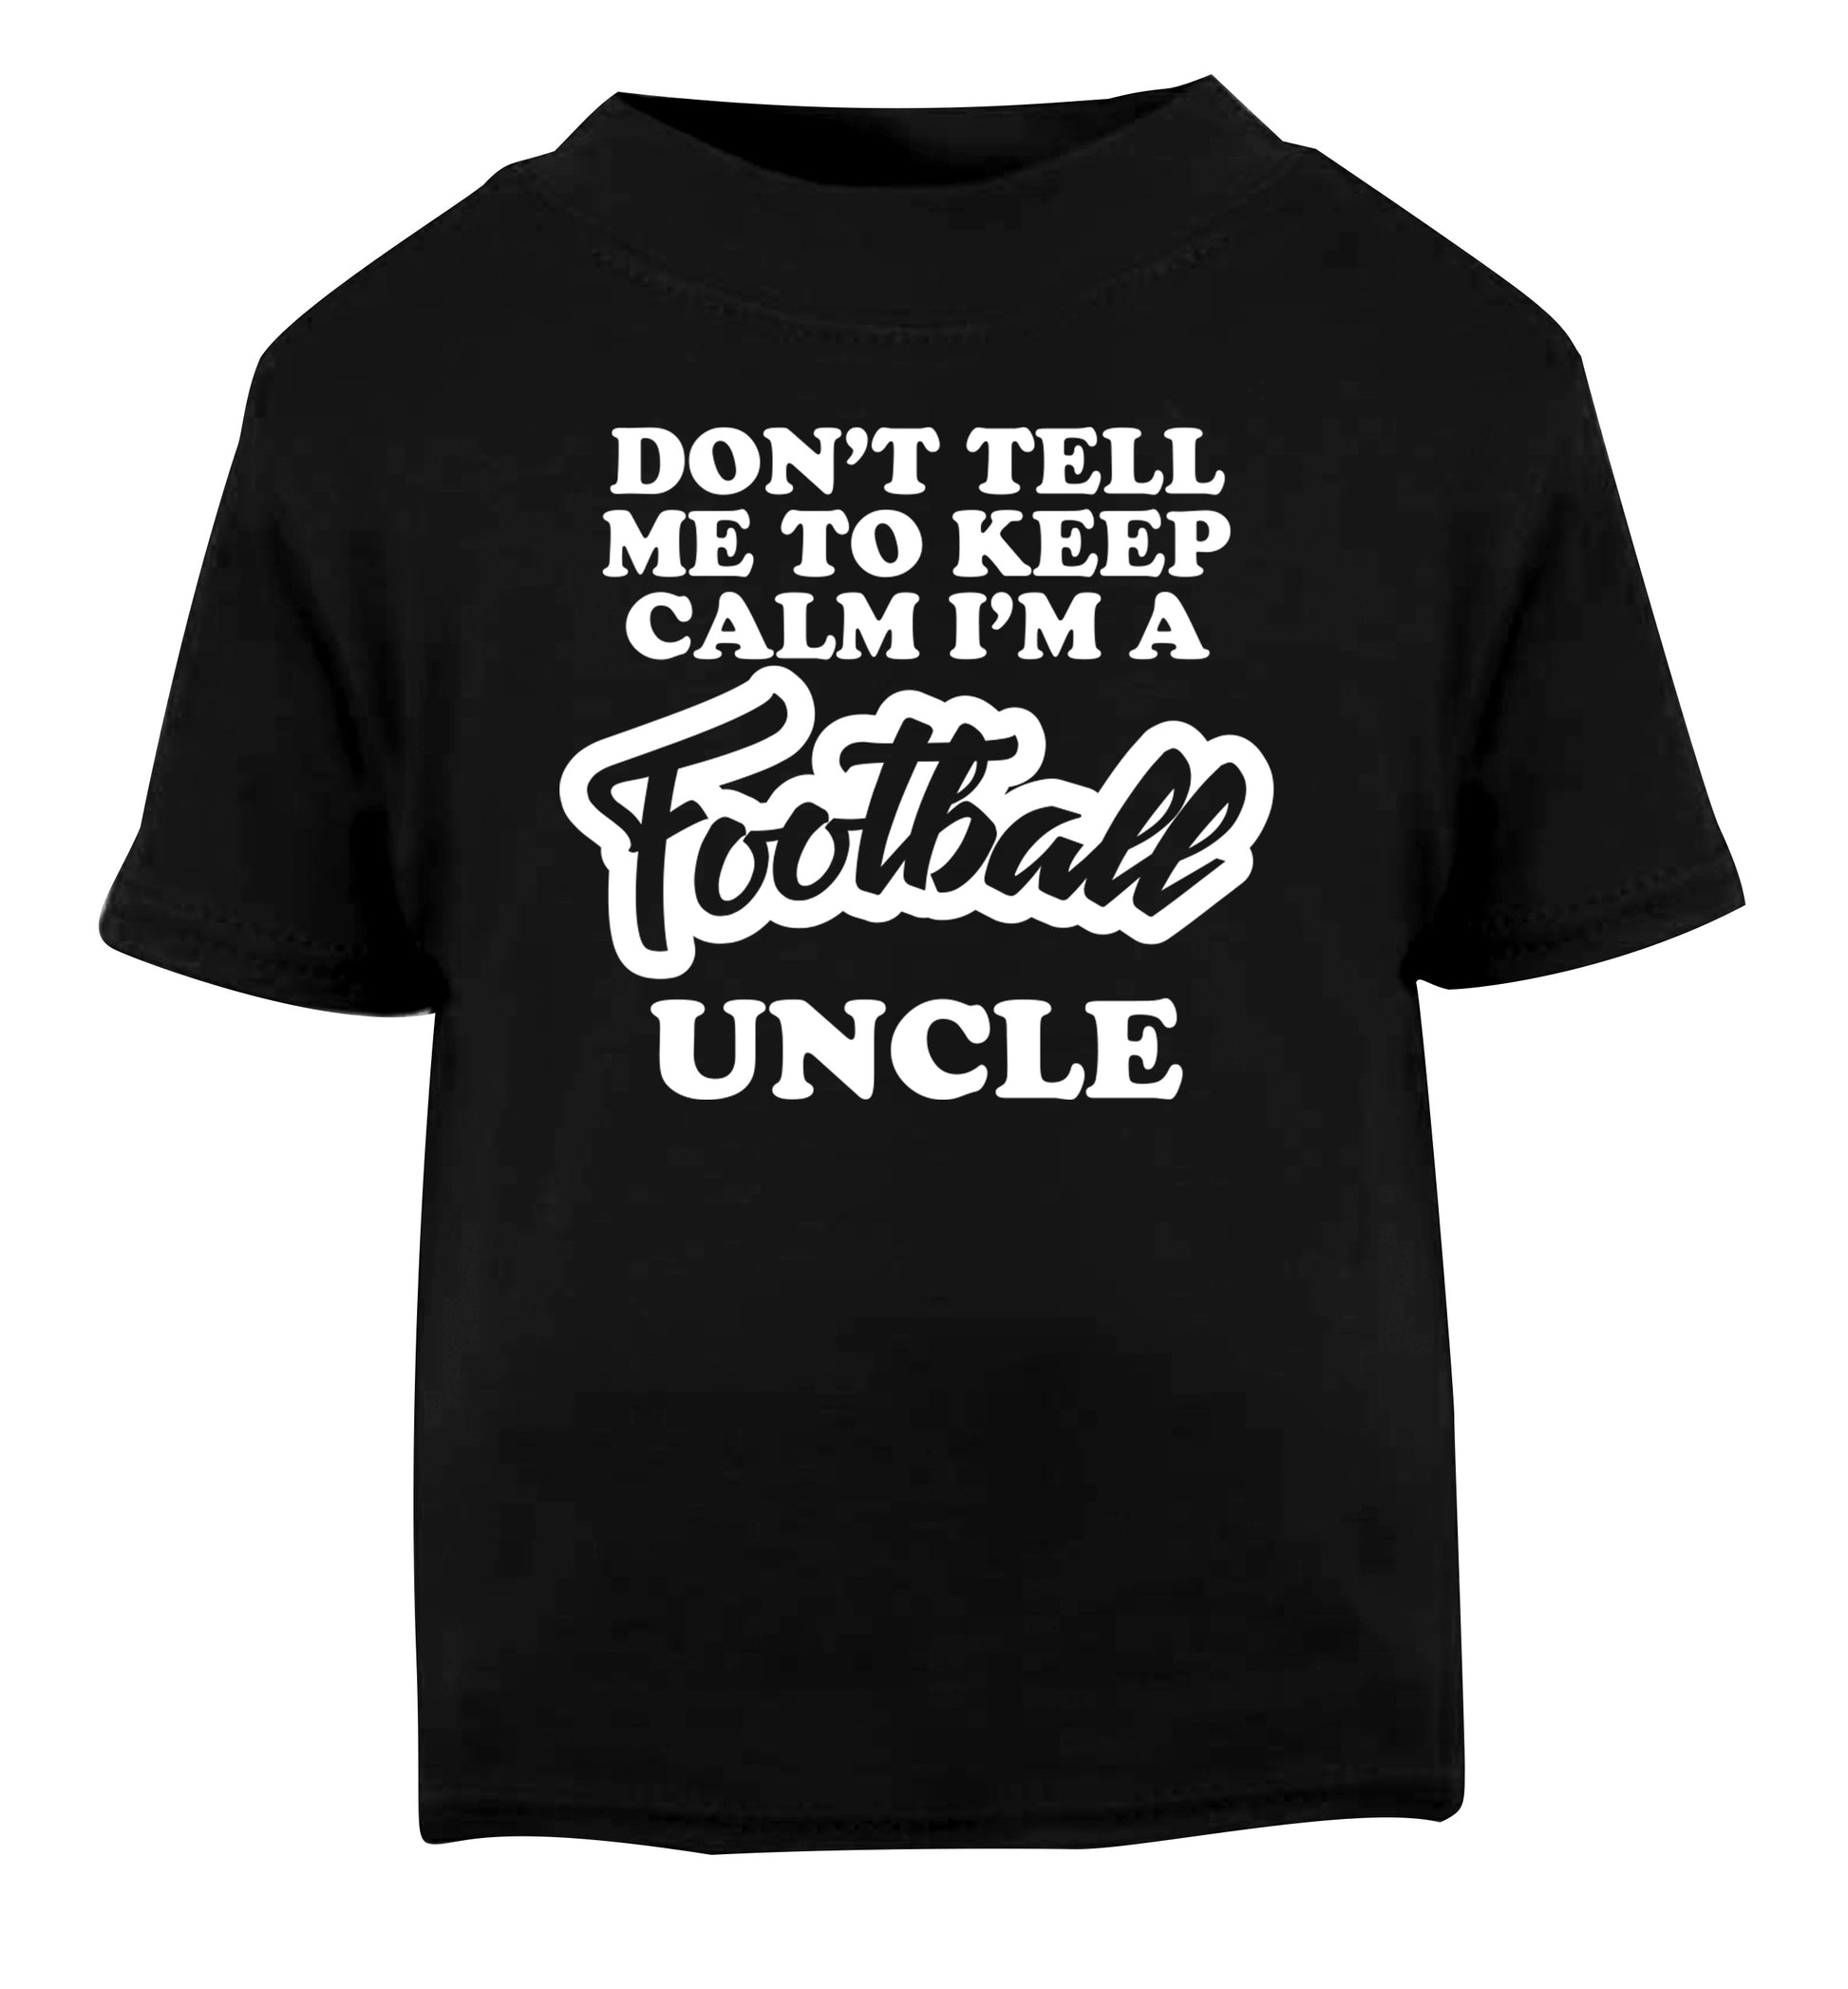 Don't tell me to keep calm I'm a football uncle Black Baby Toddler Tshirt 2 years